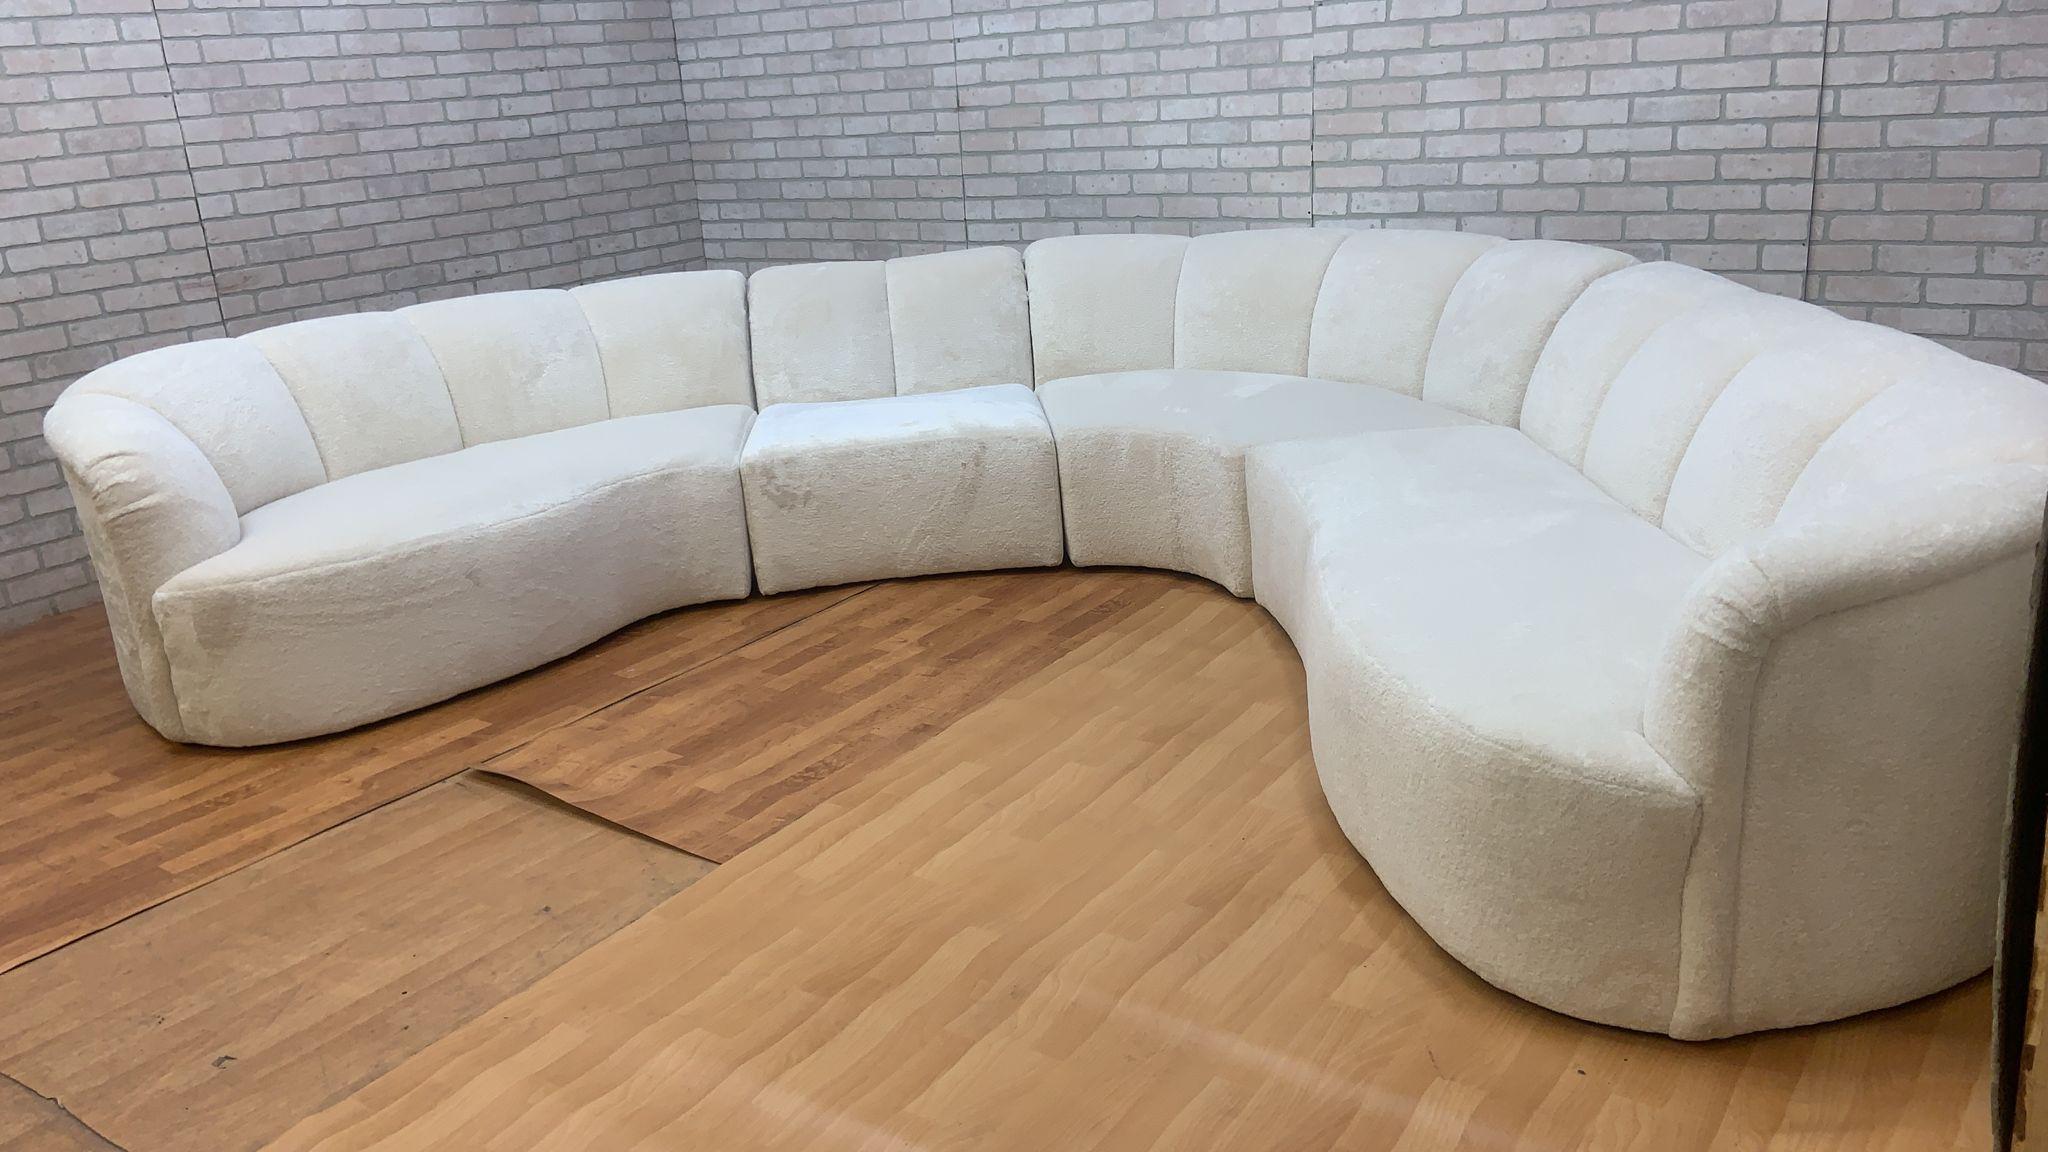 Curved Channel Back Serpentine Sectional Sofa Newly Upholstered in Alpaca Wool 5